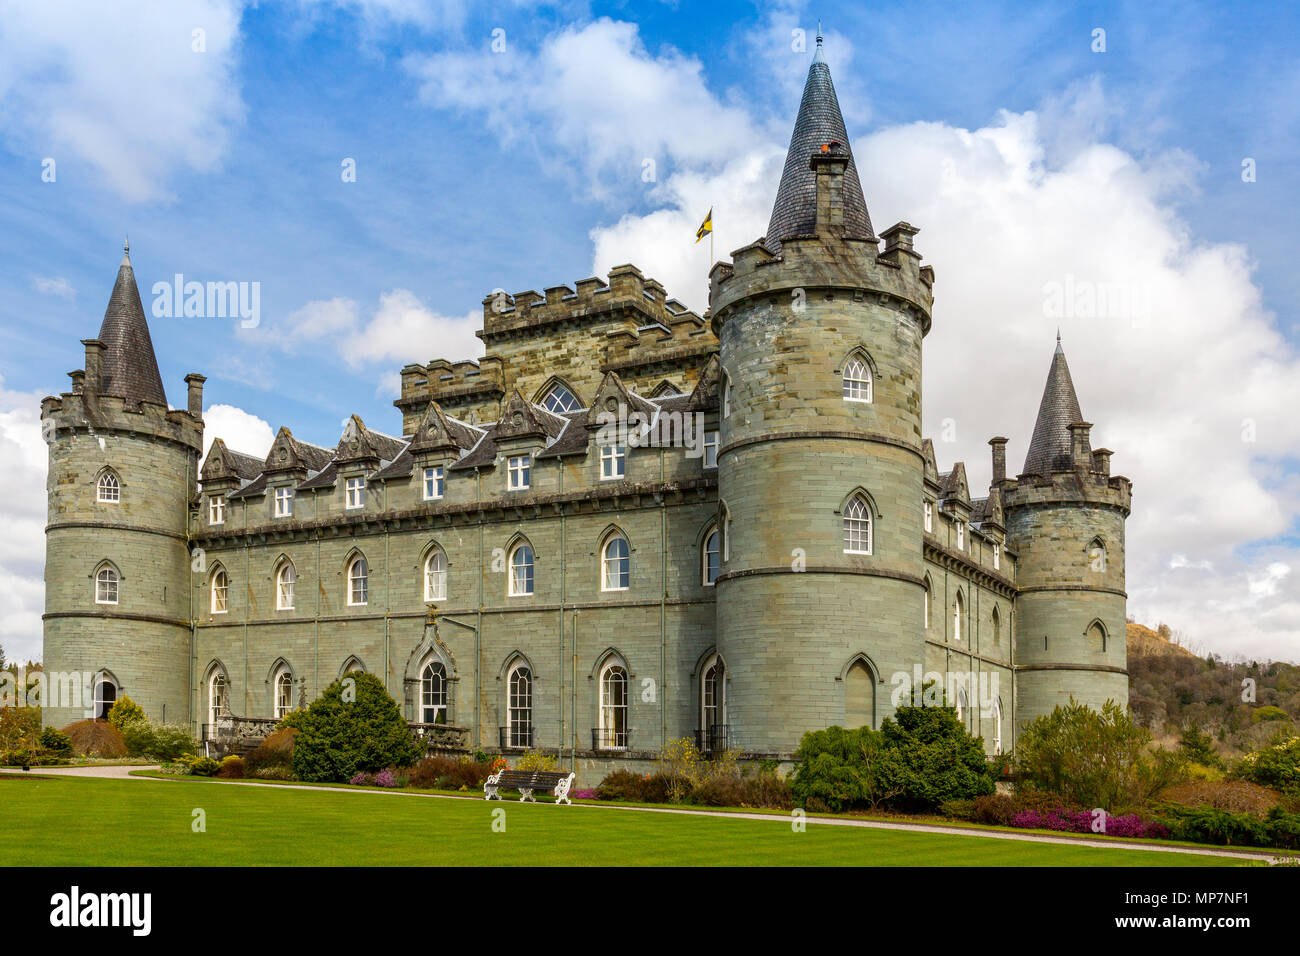 The historic turreted Inveraray Castle from 1789, seat of the Clan Campbell, stands on the shores of Loch Fyne, Argyll & Bute, Scotland, UK Stock Photo